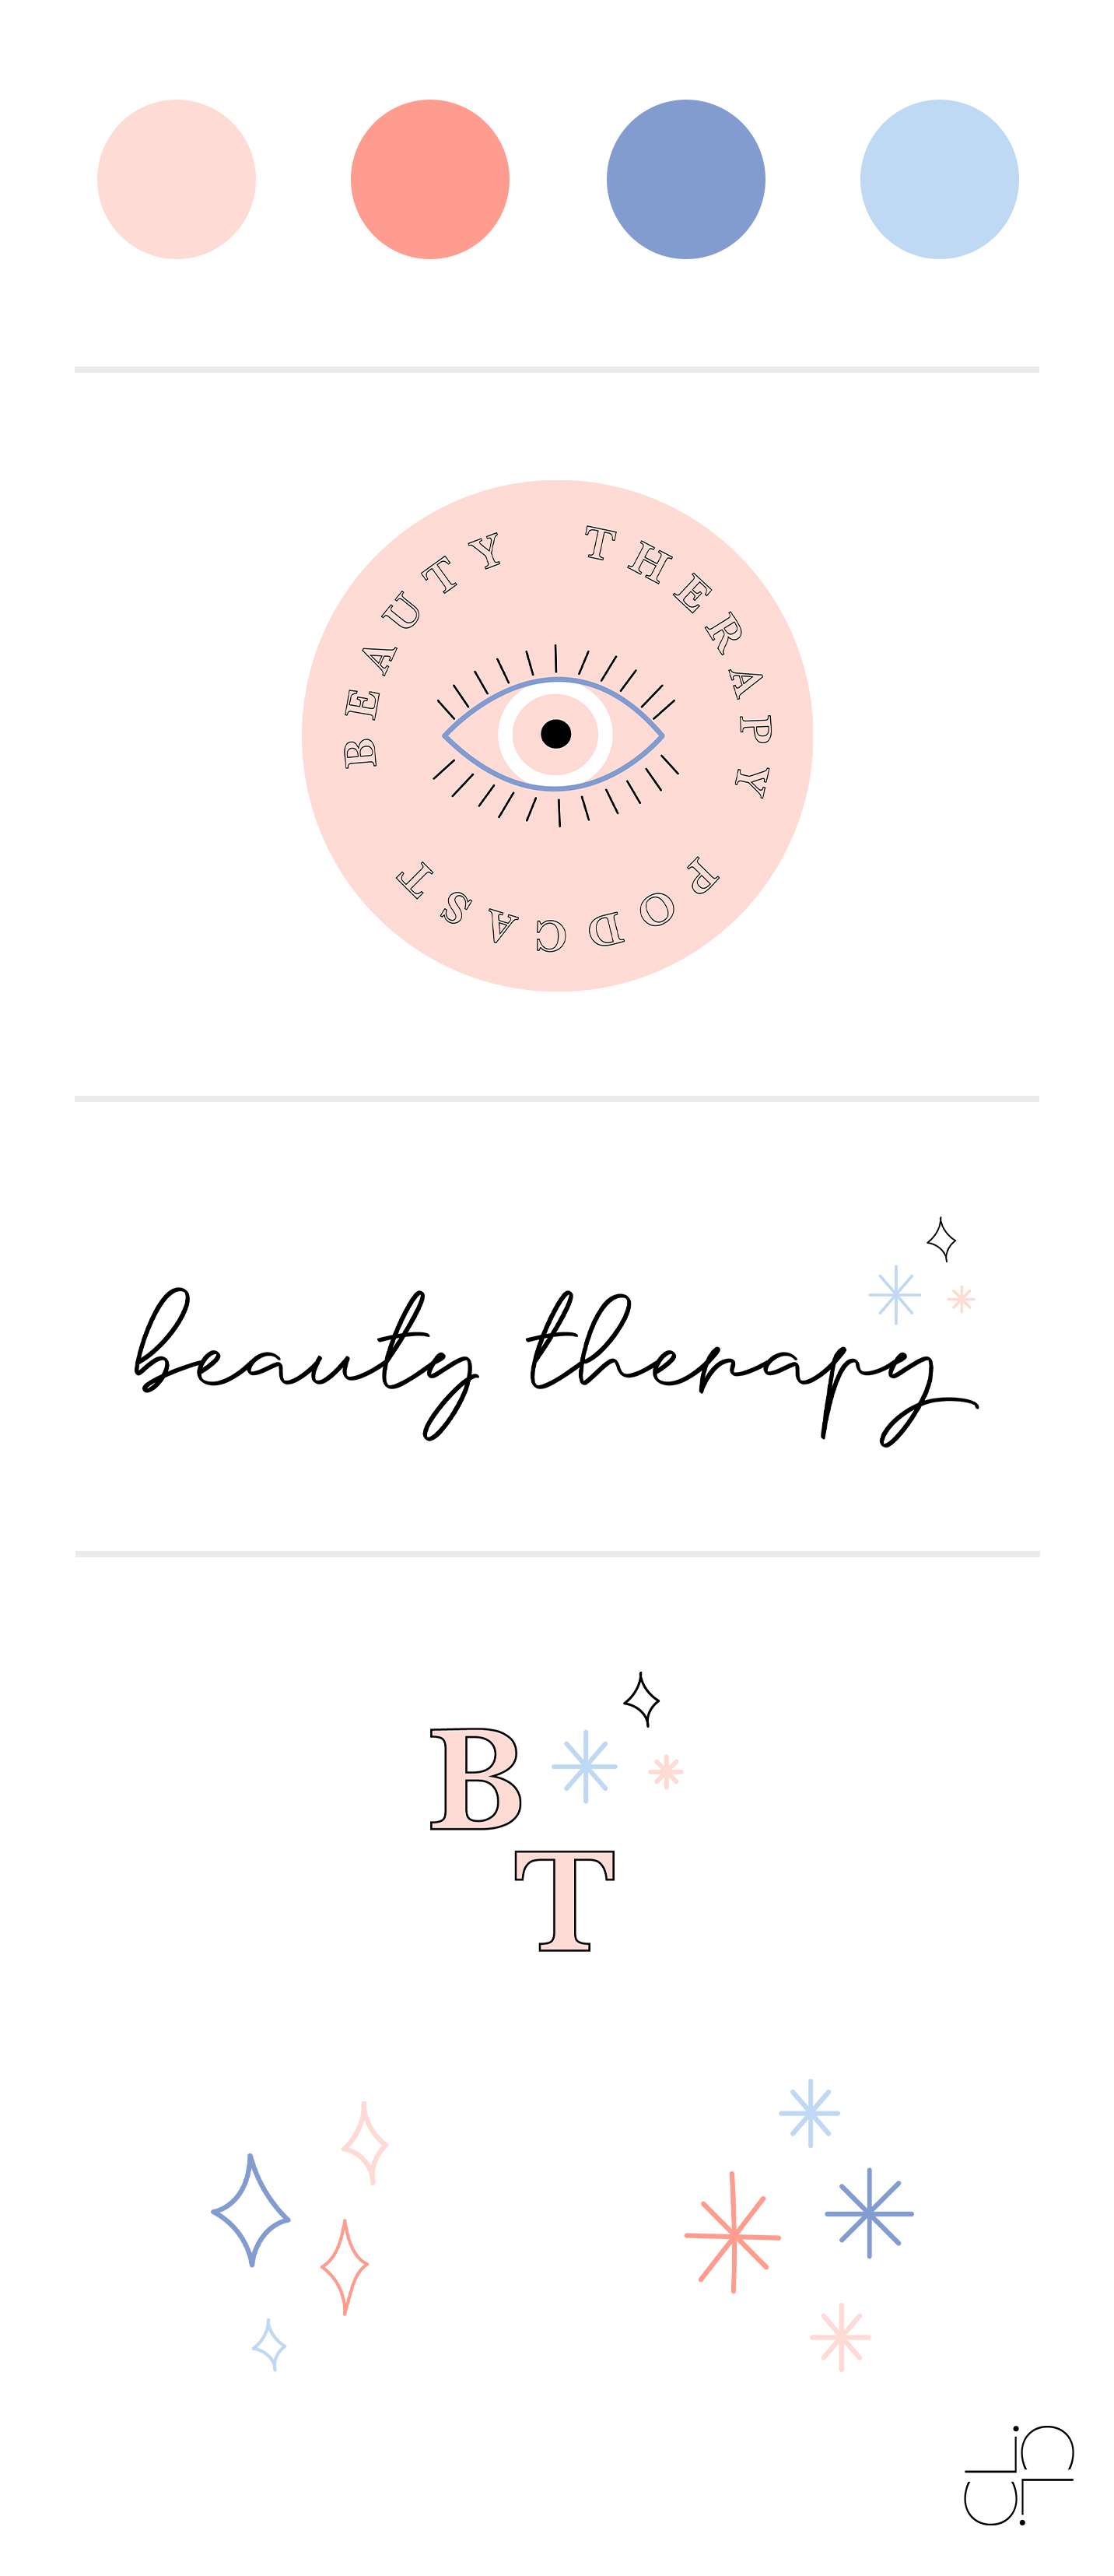 beauty Therapy design